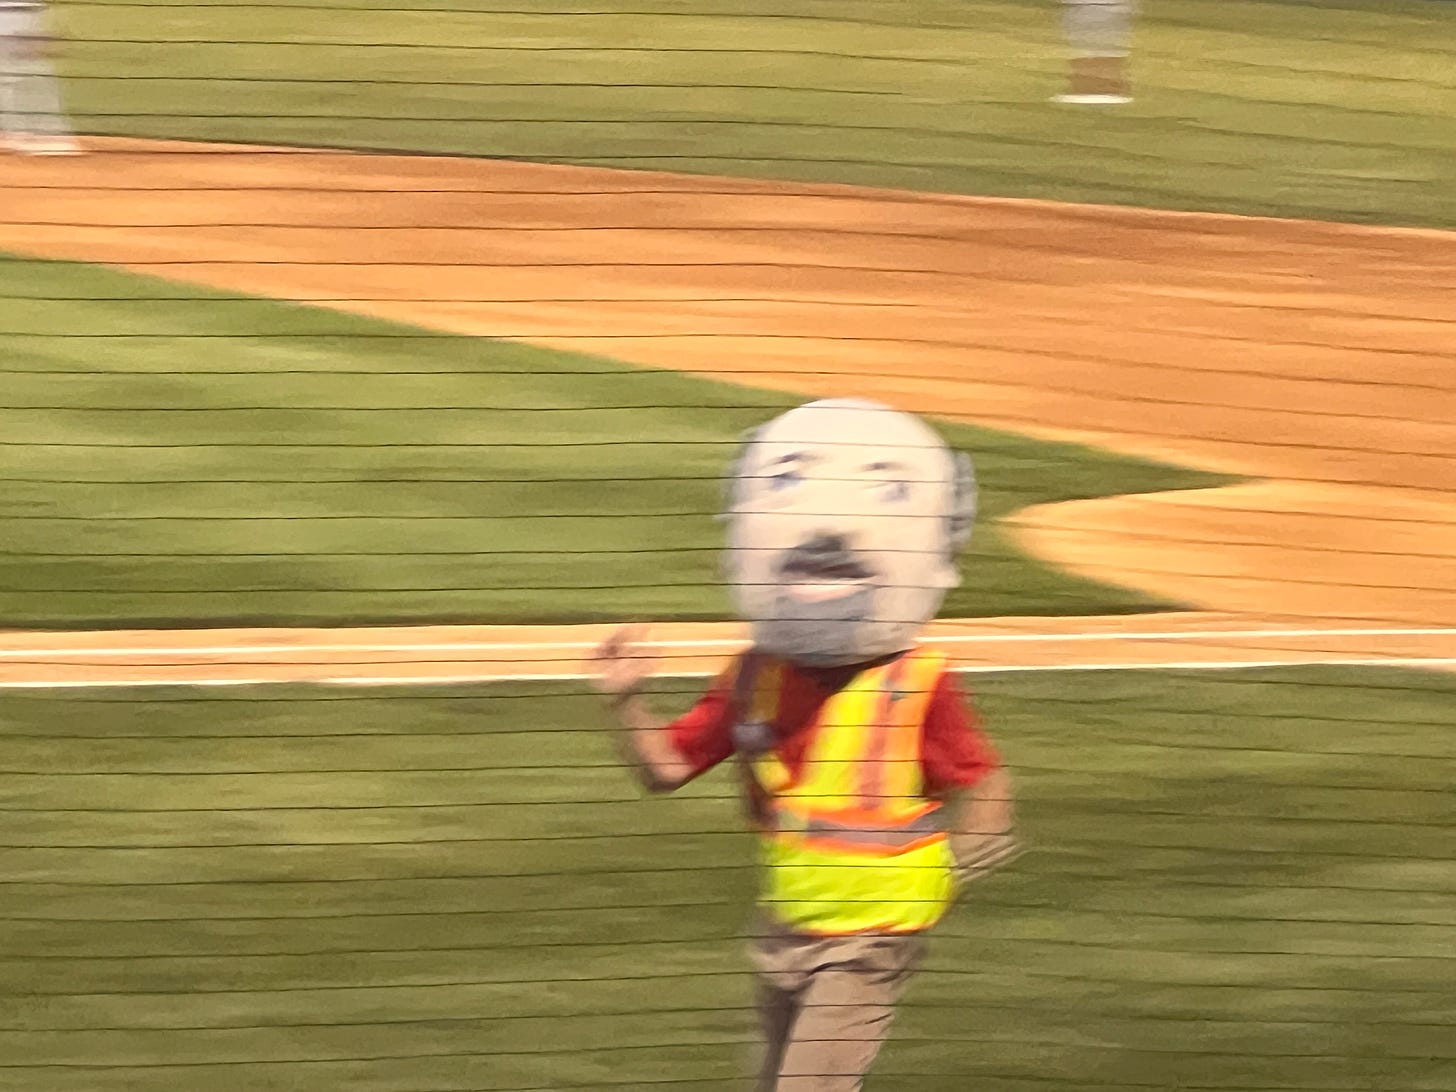 a blurry photo of a man running on a baseball field with the comically large mascot head of a goatee and balding grey hair. wearing a high vis vest